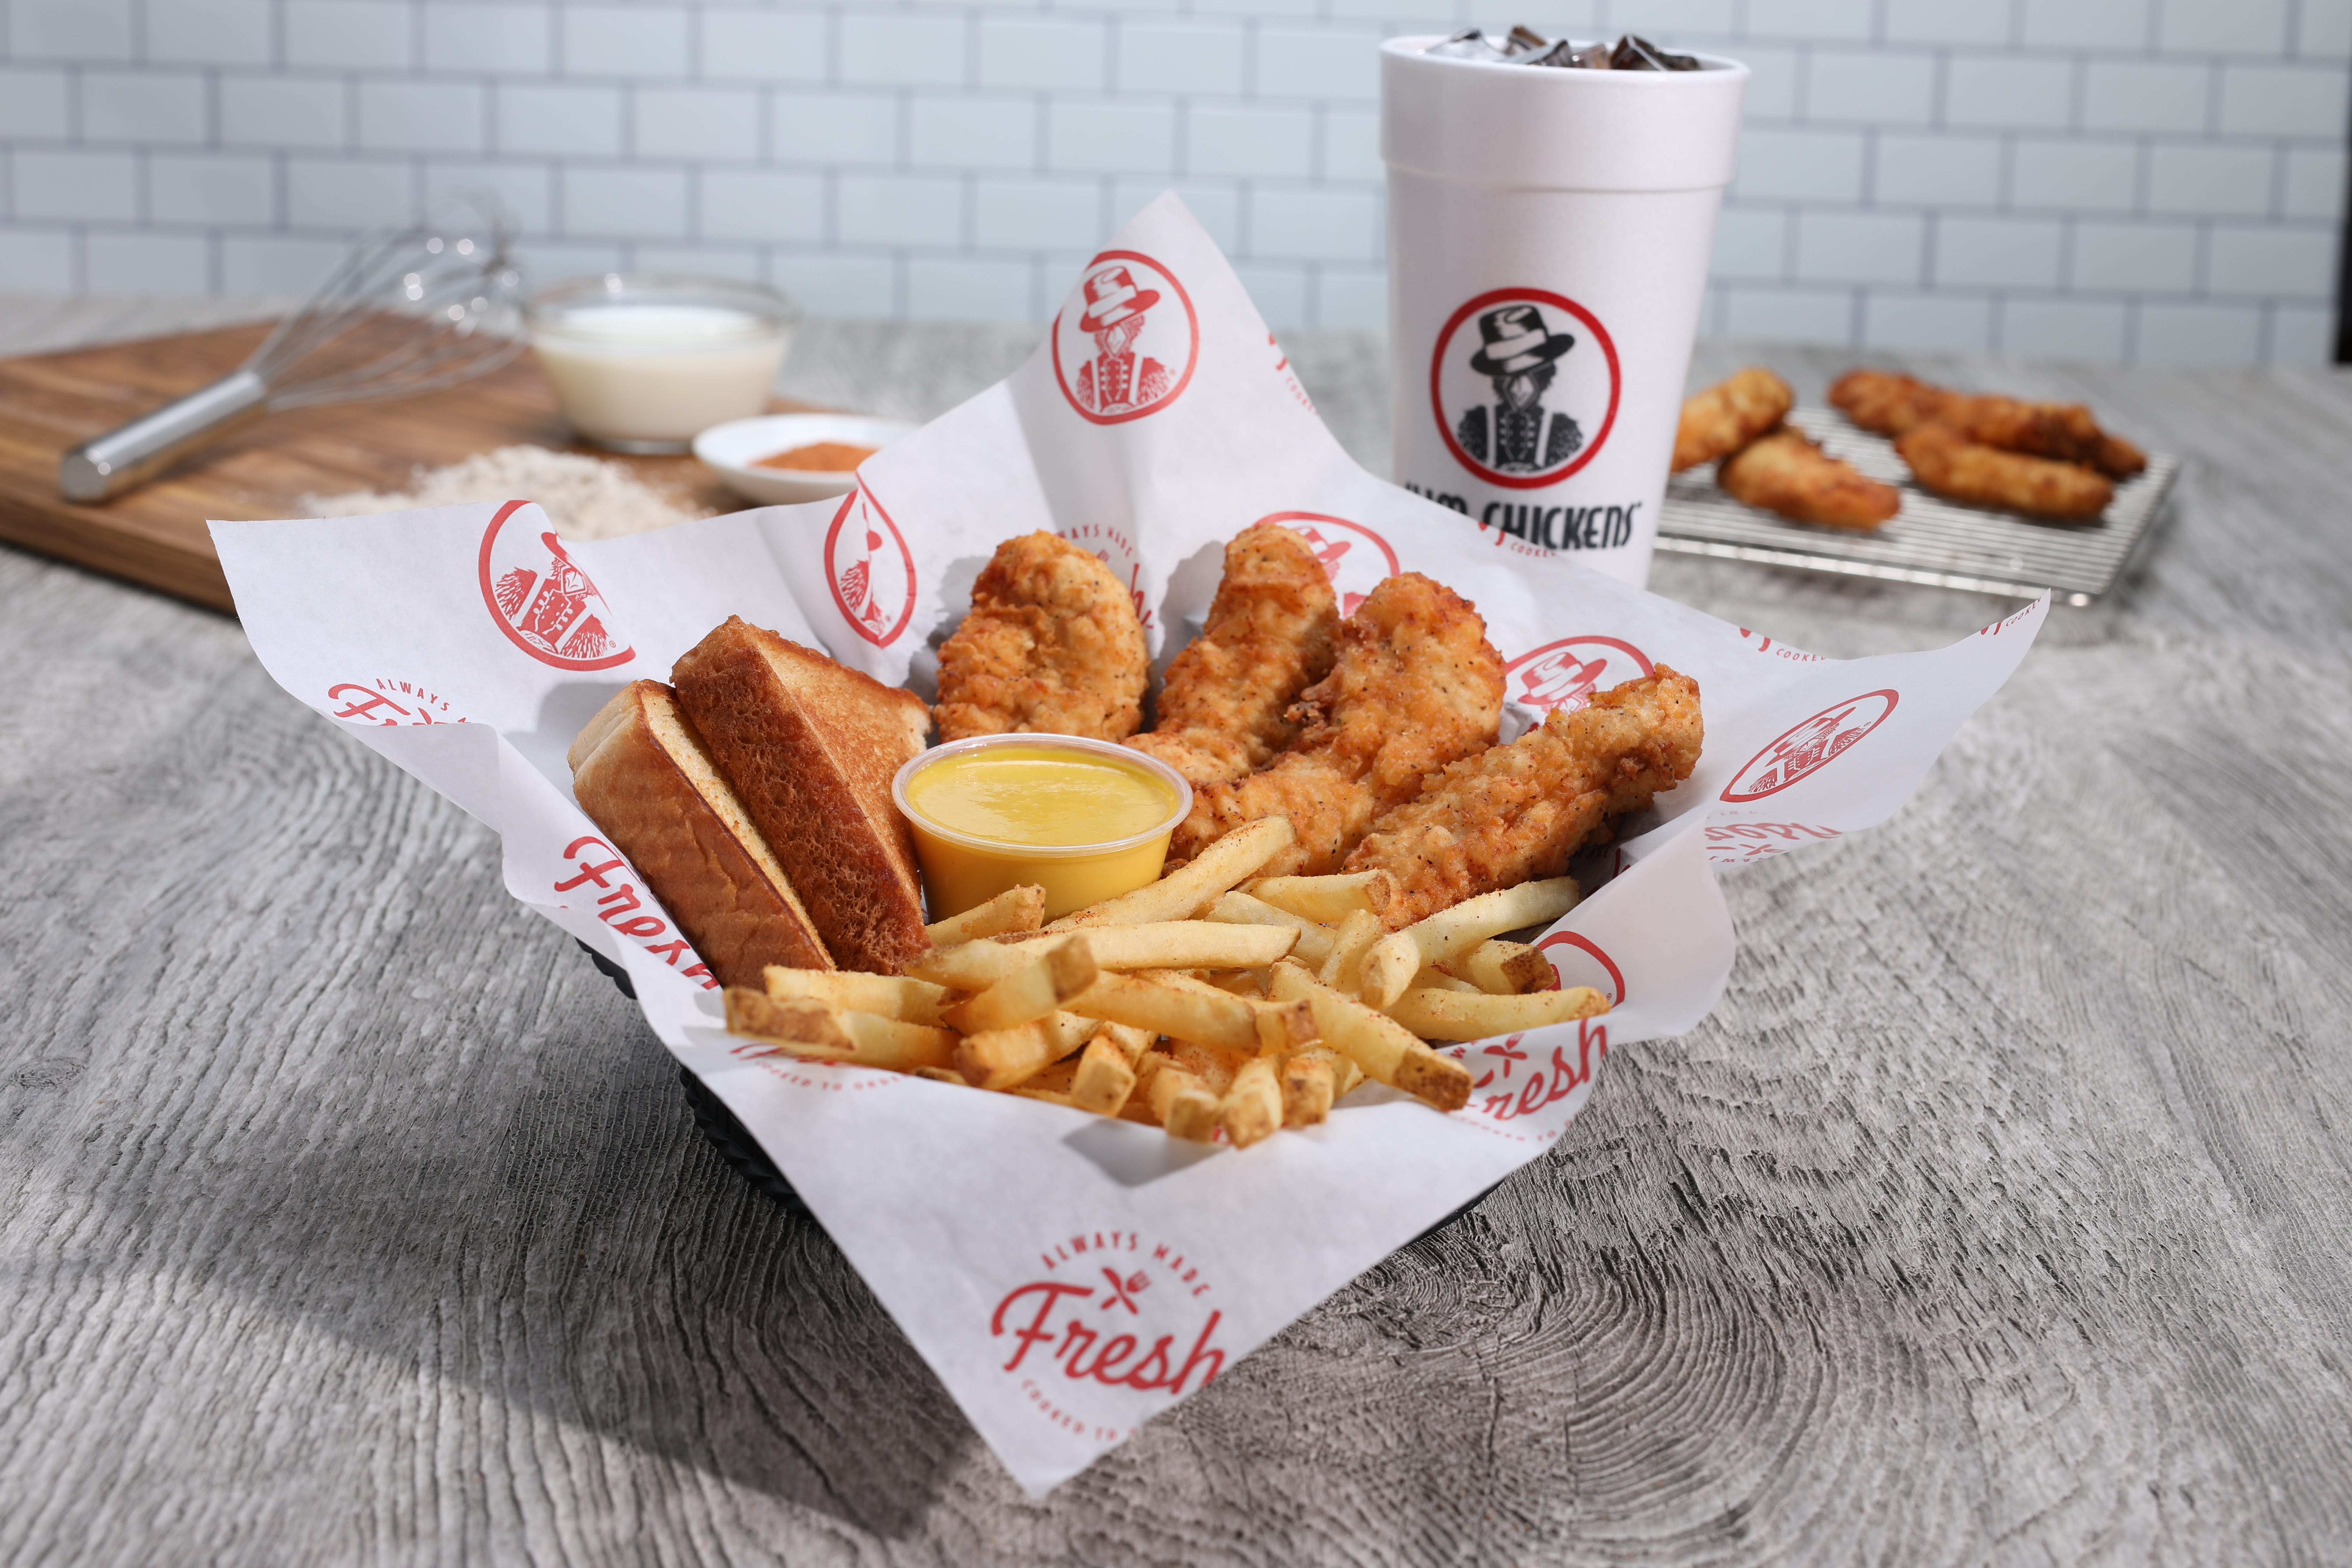 Popular Southern fried chicken chain opening several NJ restaurants. Here's where